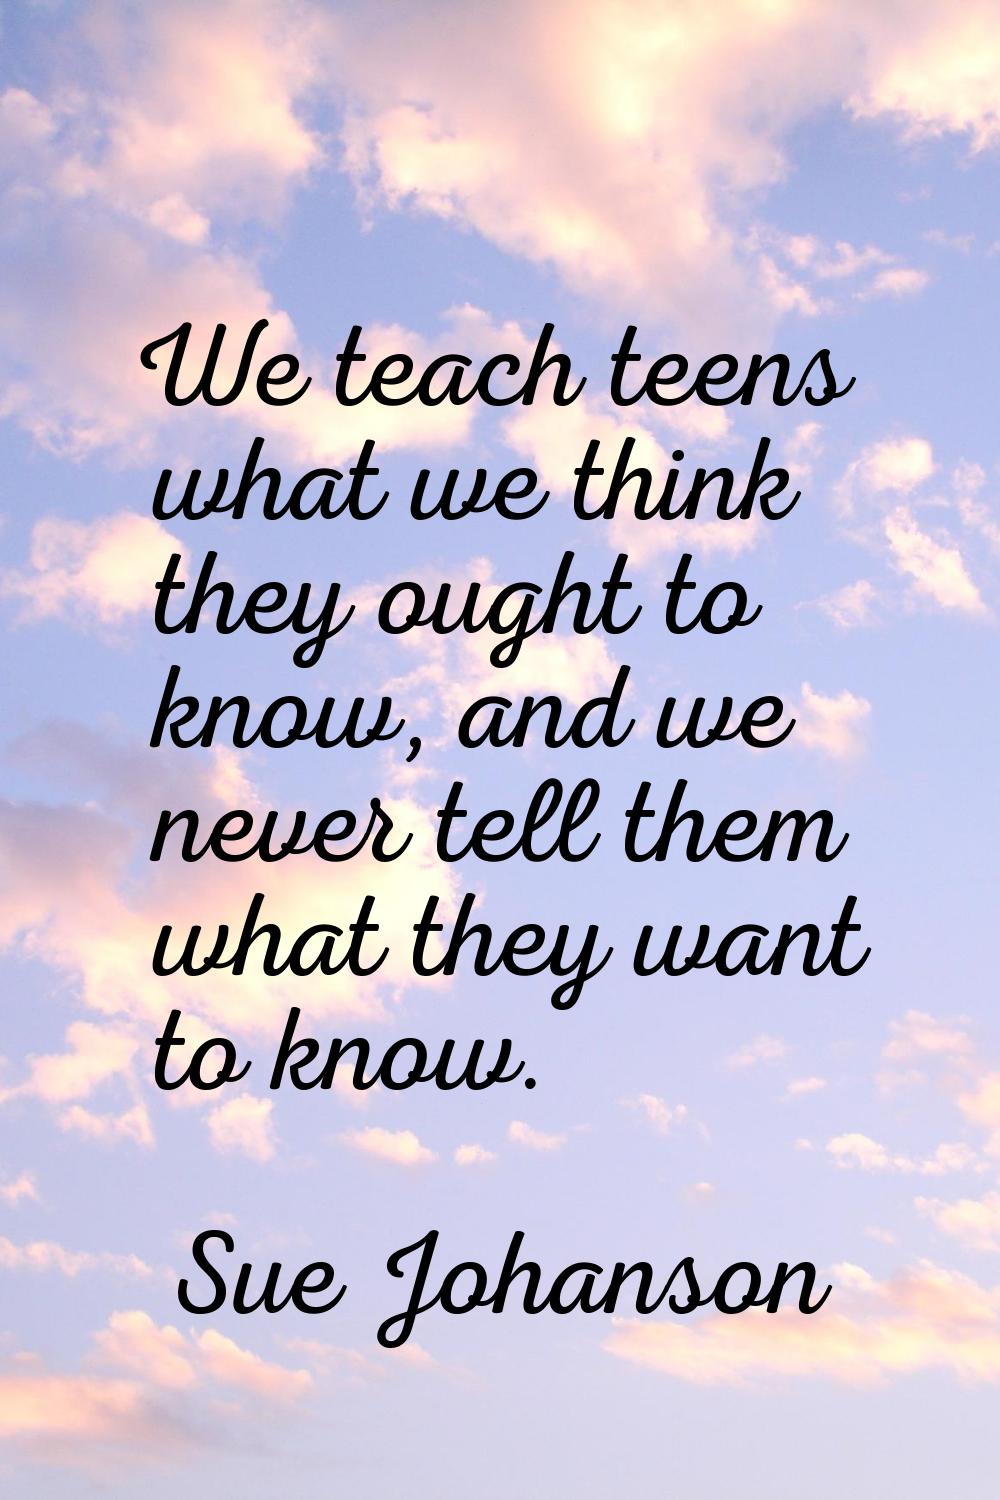 We teach teens what we think they ought to know, and we never tell them what they want to know.